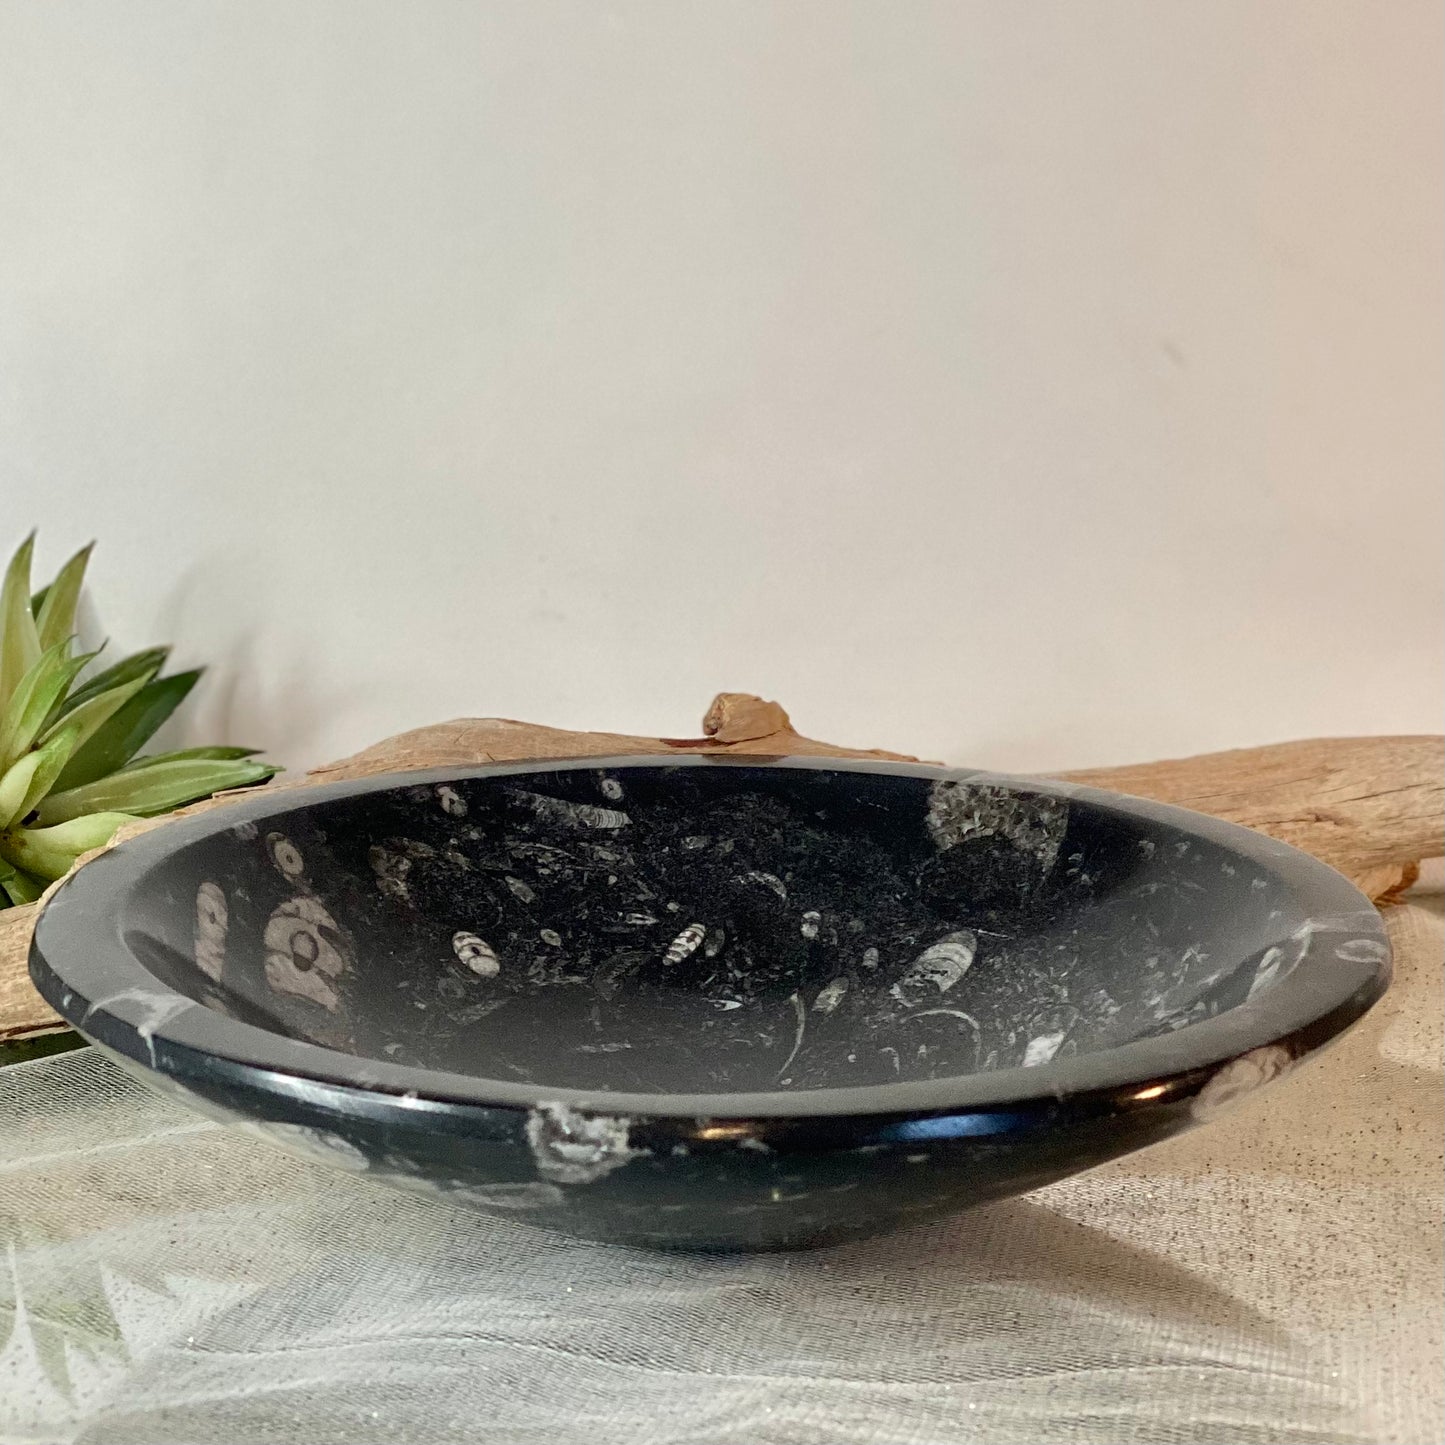 8" Fossil Bowl: Prehistoric Elegance for Home Decor or Your Alter